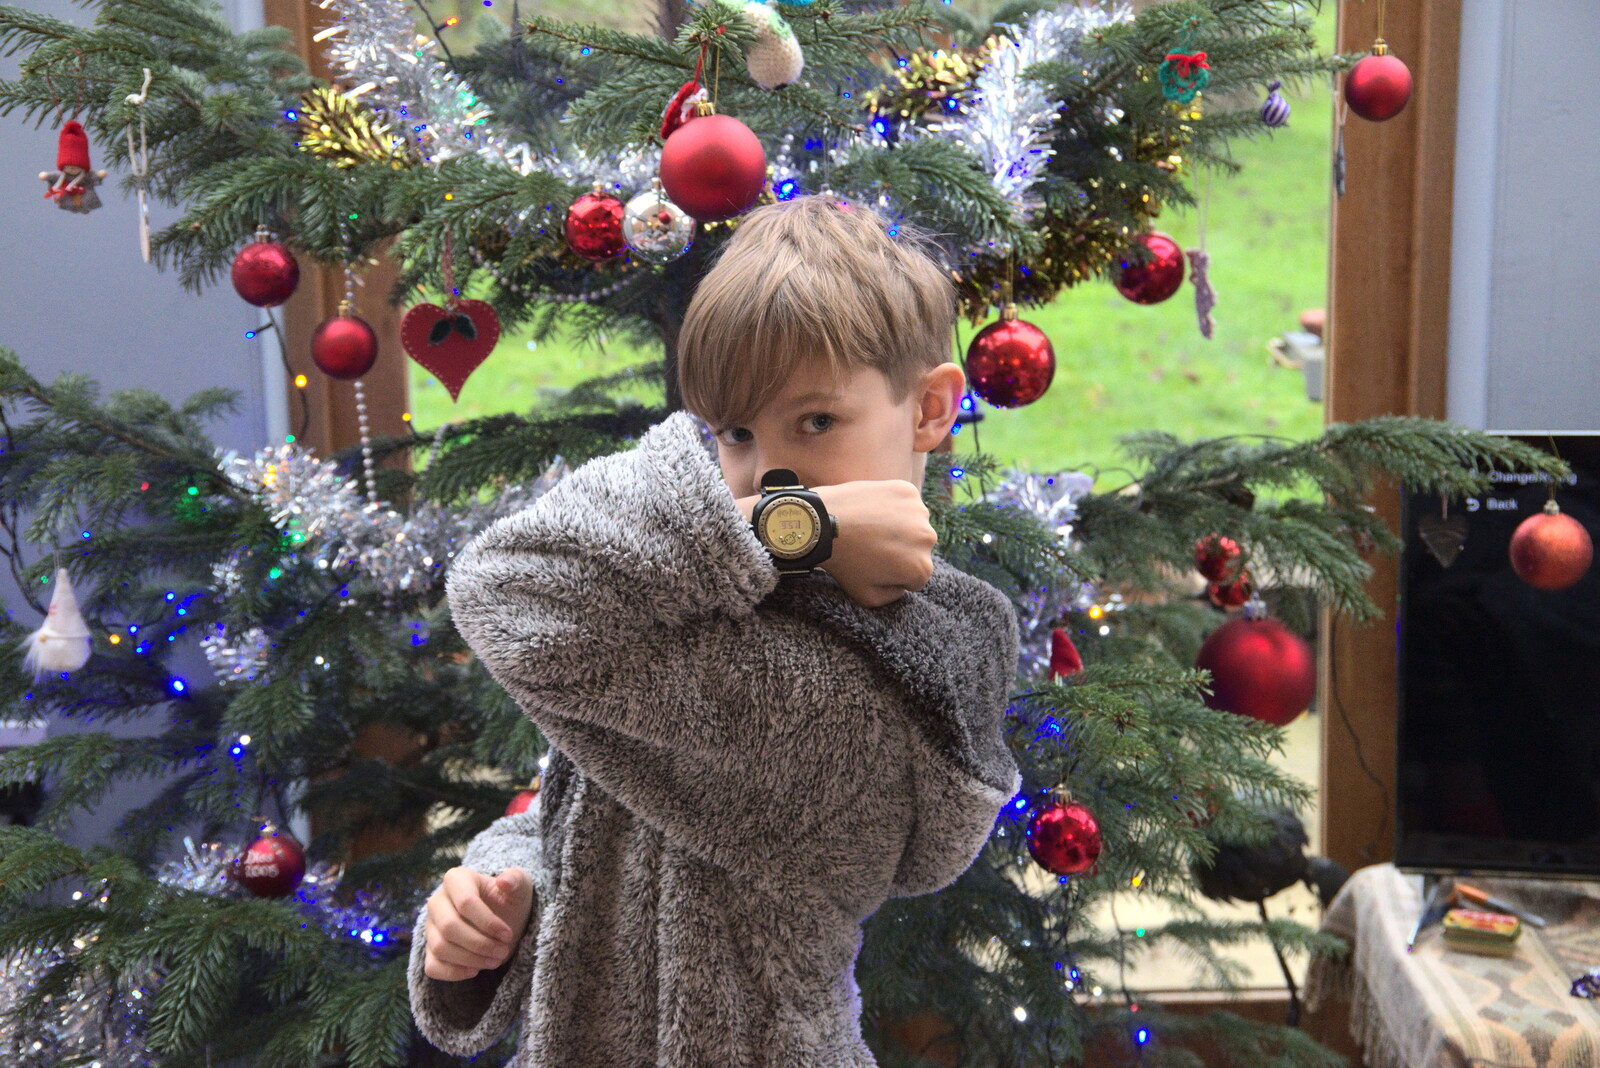 Harry shows off his new Harry Potter watch from Christmas Day at Home, Brome, Suffolk - 25th December 2021